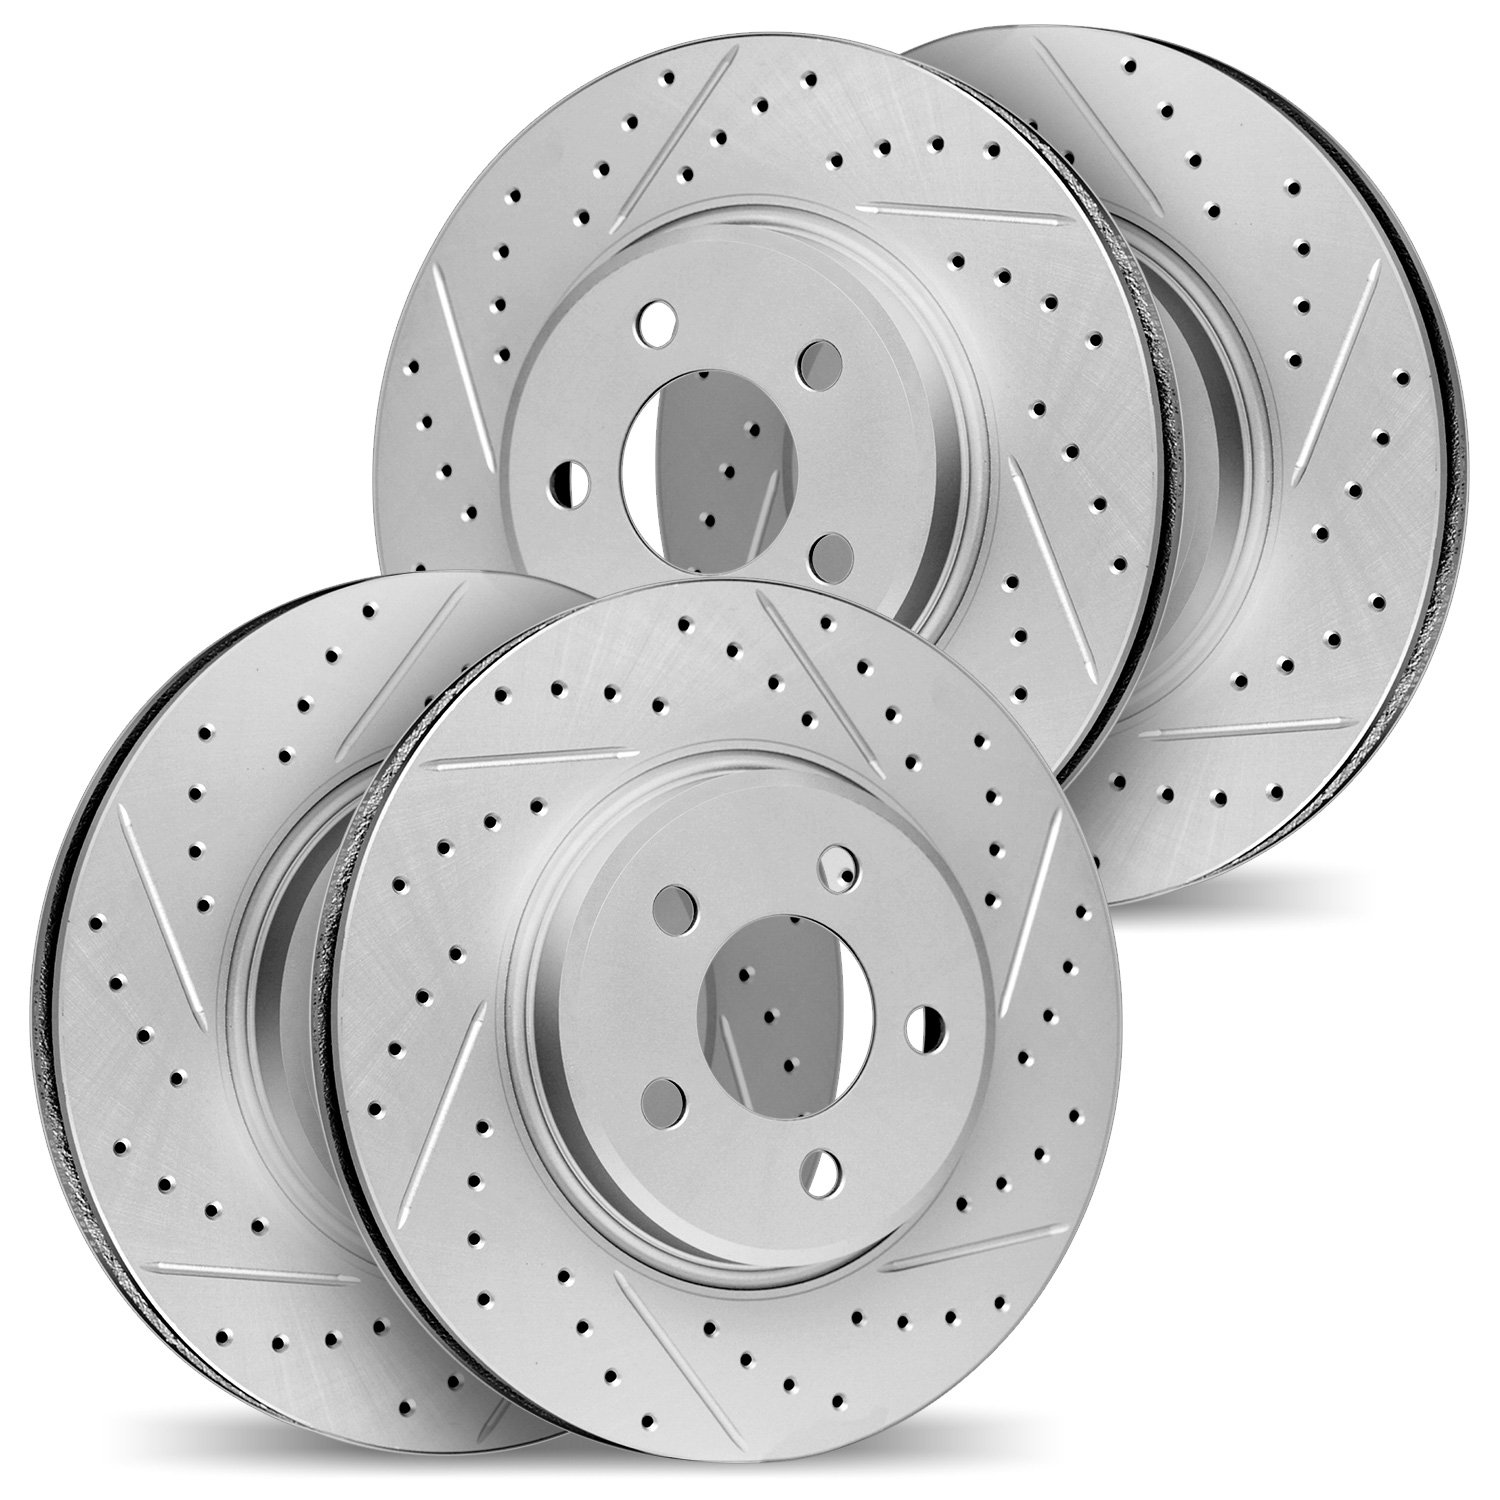 2004-73038 Geoperformance Drilled/Slotted Brake Rotors, 2000-2002 Audi/Volkswagen, Position: Front and Rear